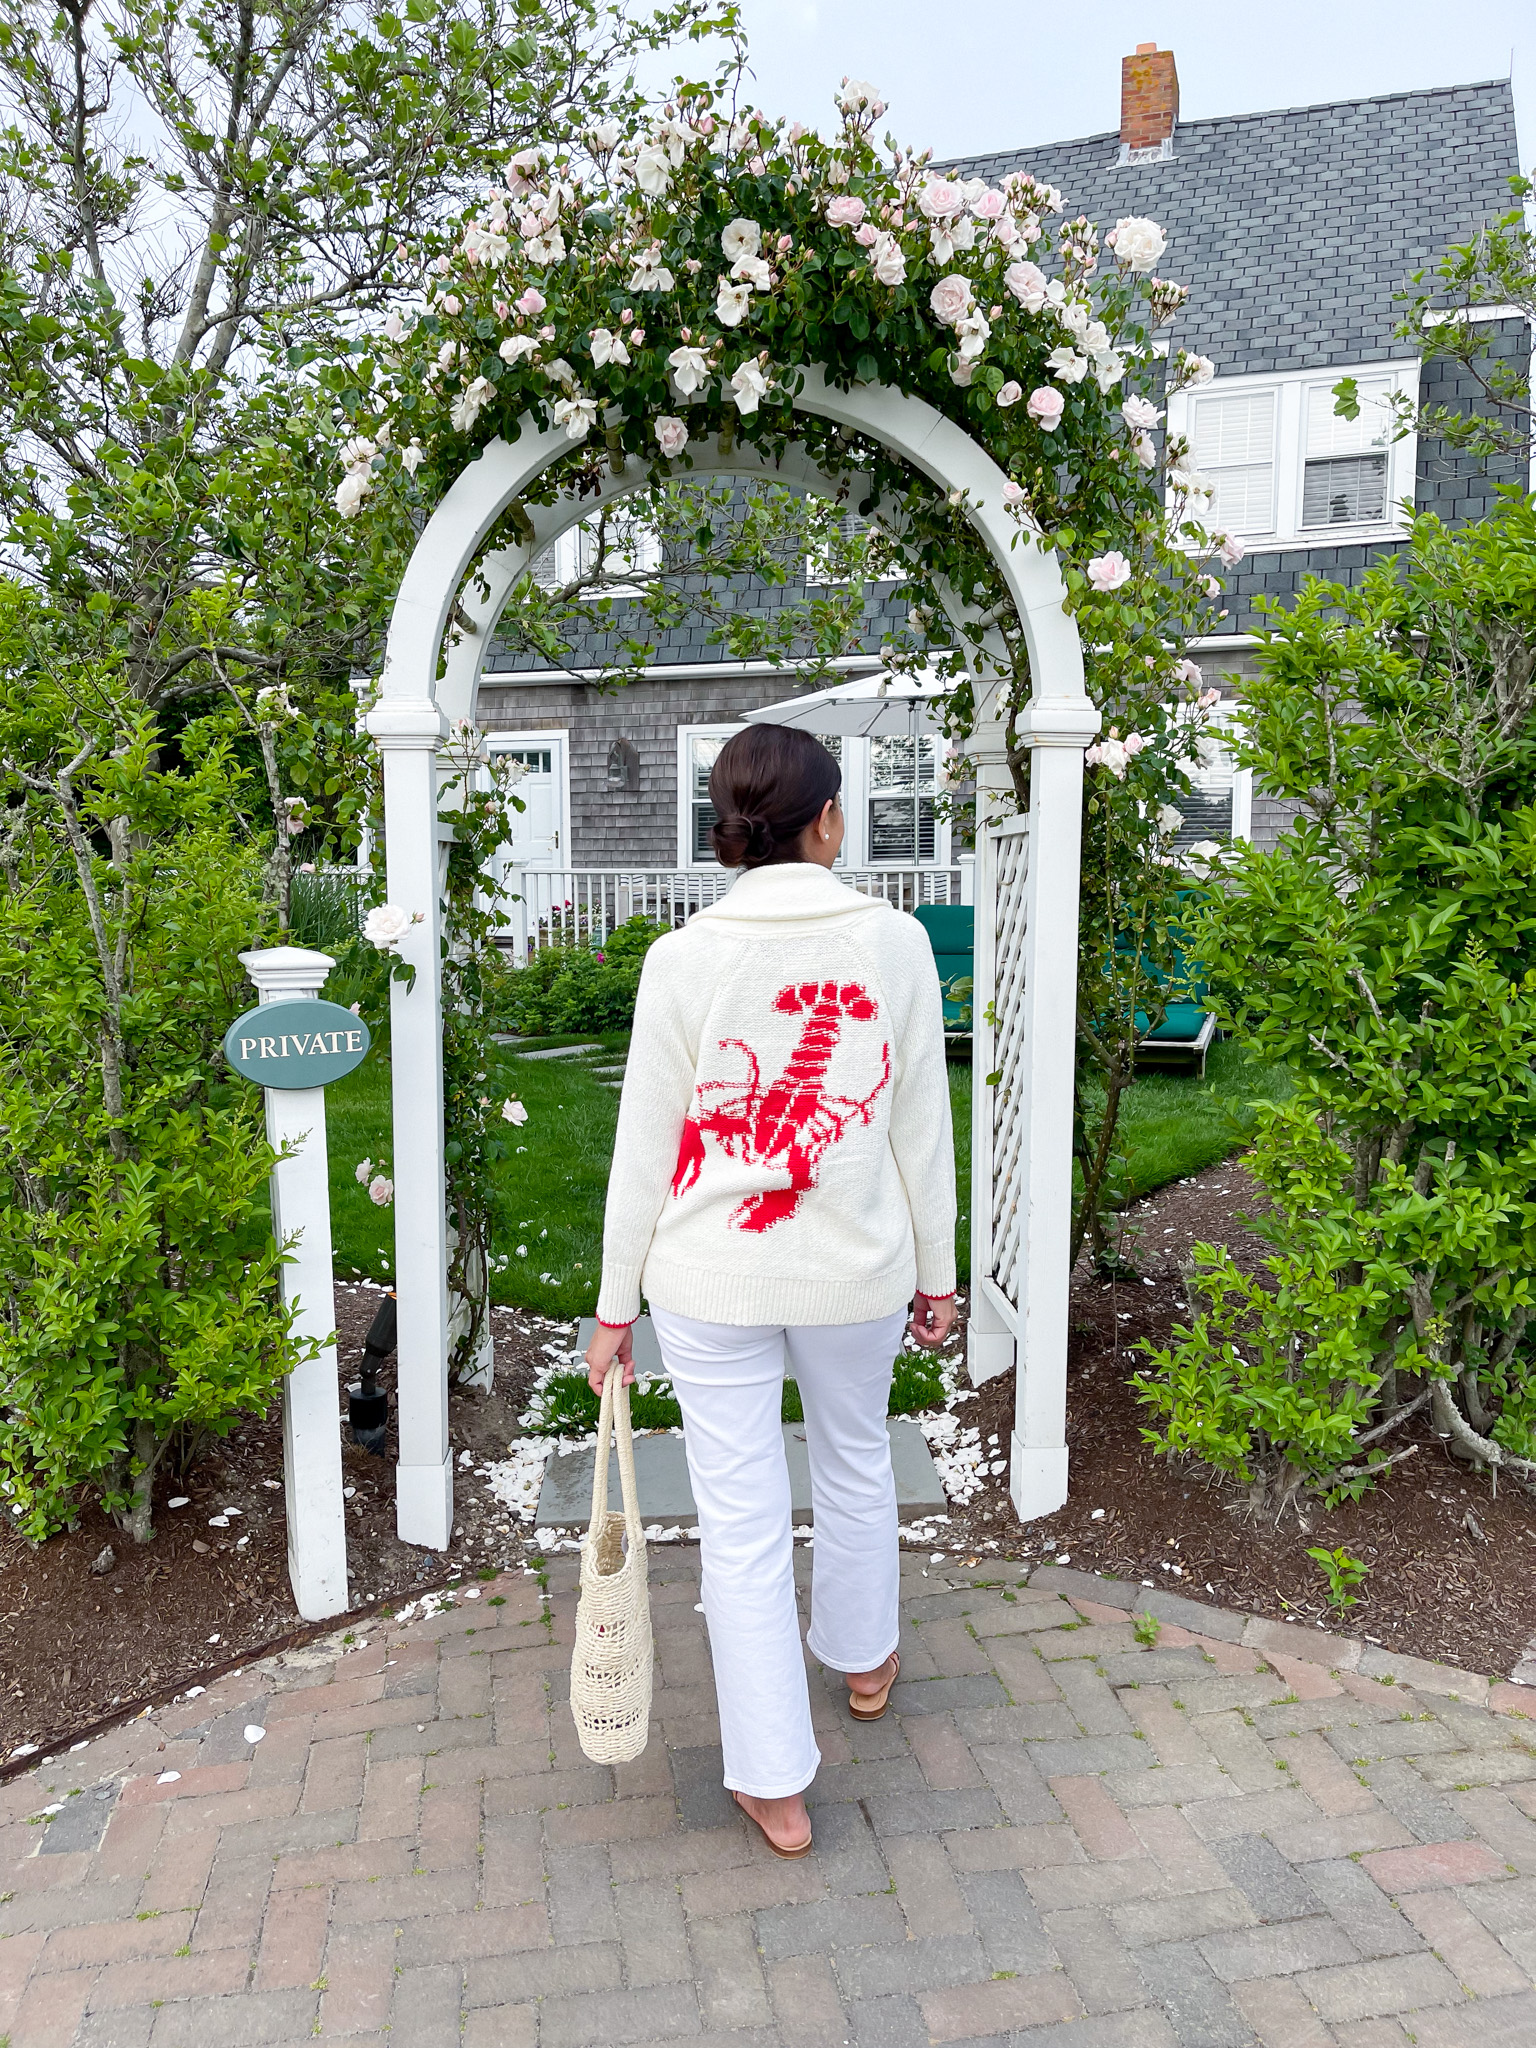 Desiree Leone of Beautifully Seaside features the lobster cardigan sweater she wore while in Nantucket this summer.